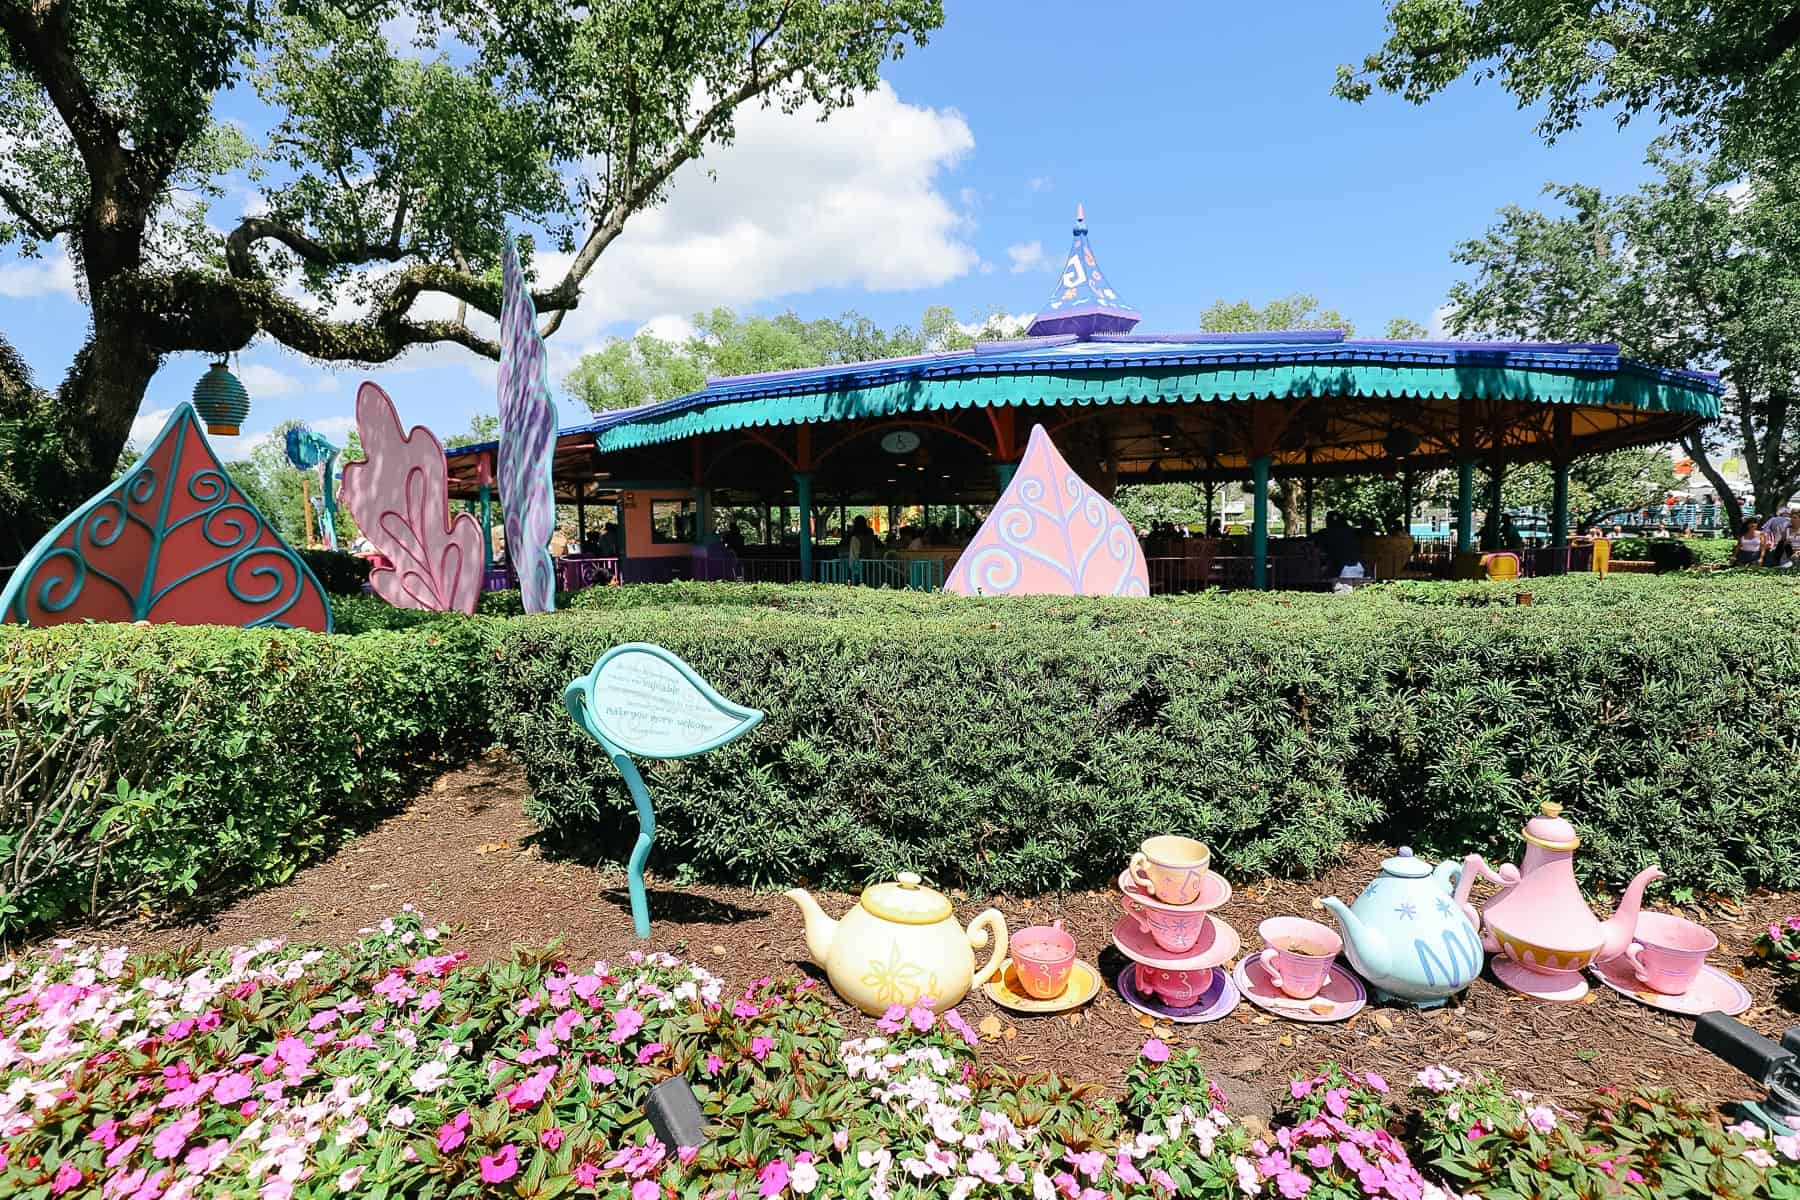 Stacks of teacups as theming outside the attraction. 